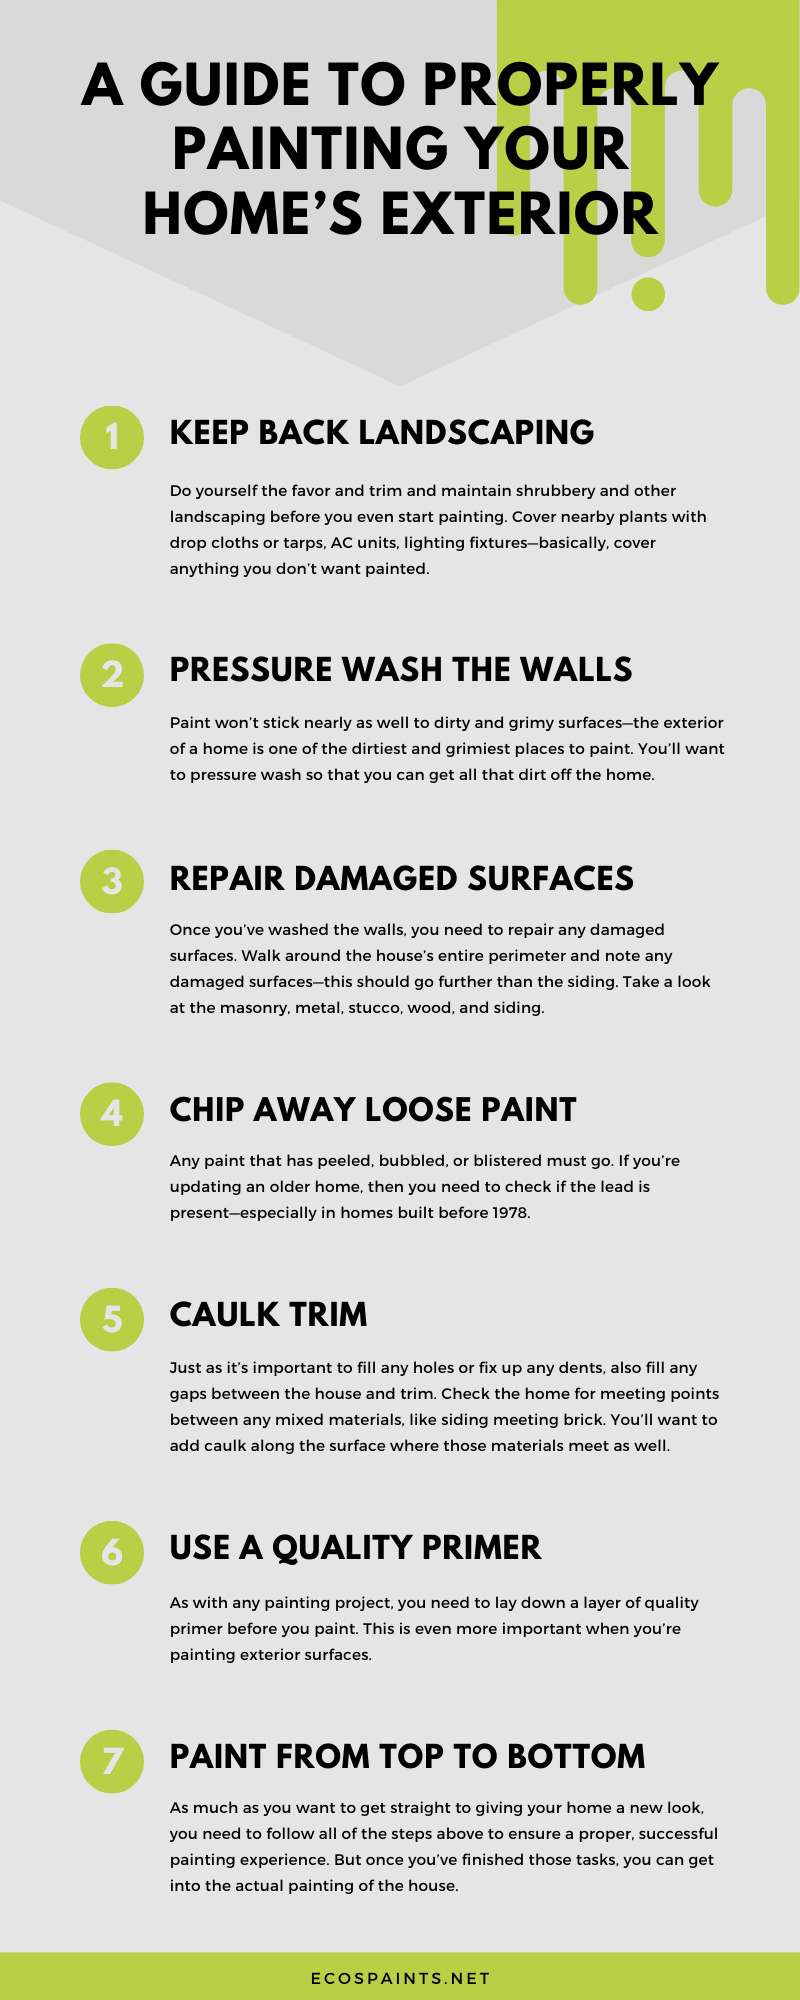 A Guide to Properly Painting Your Home’s Exterior